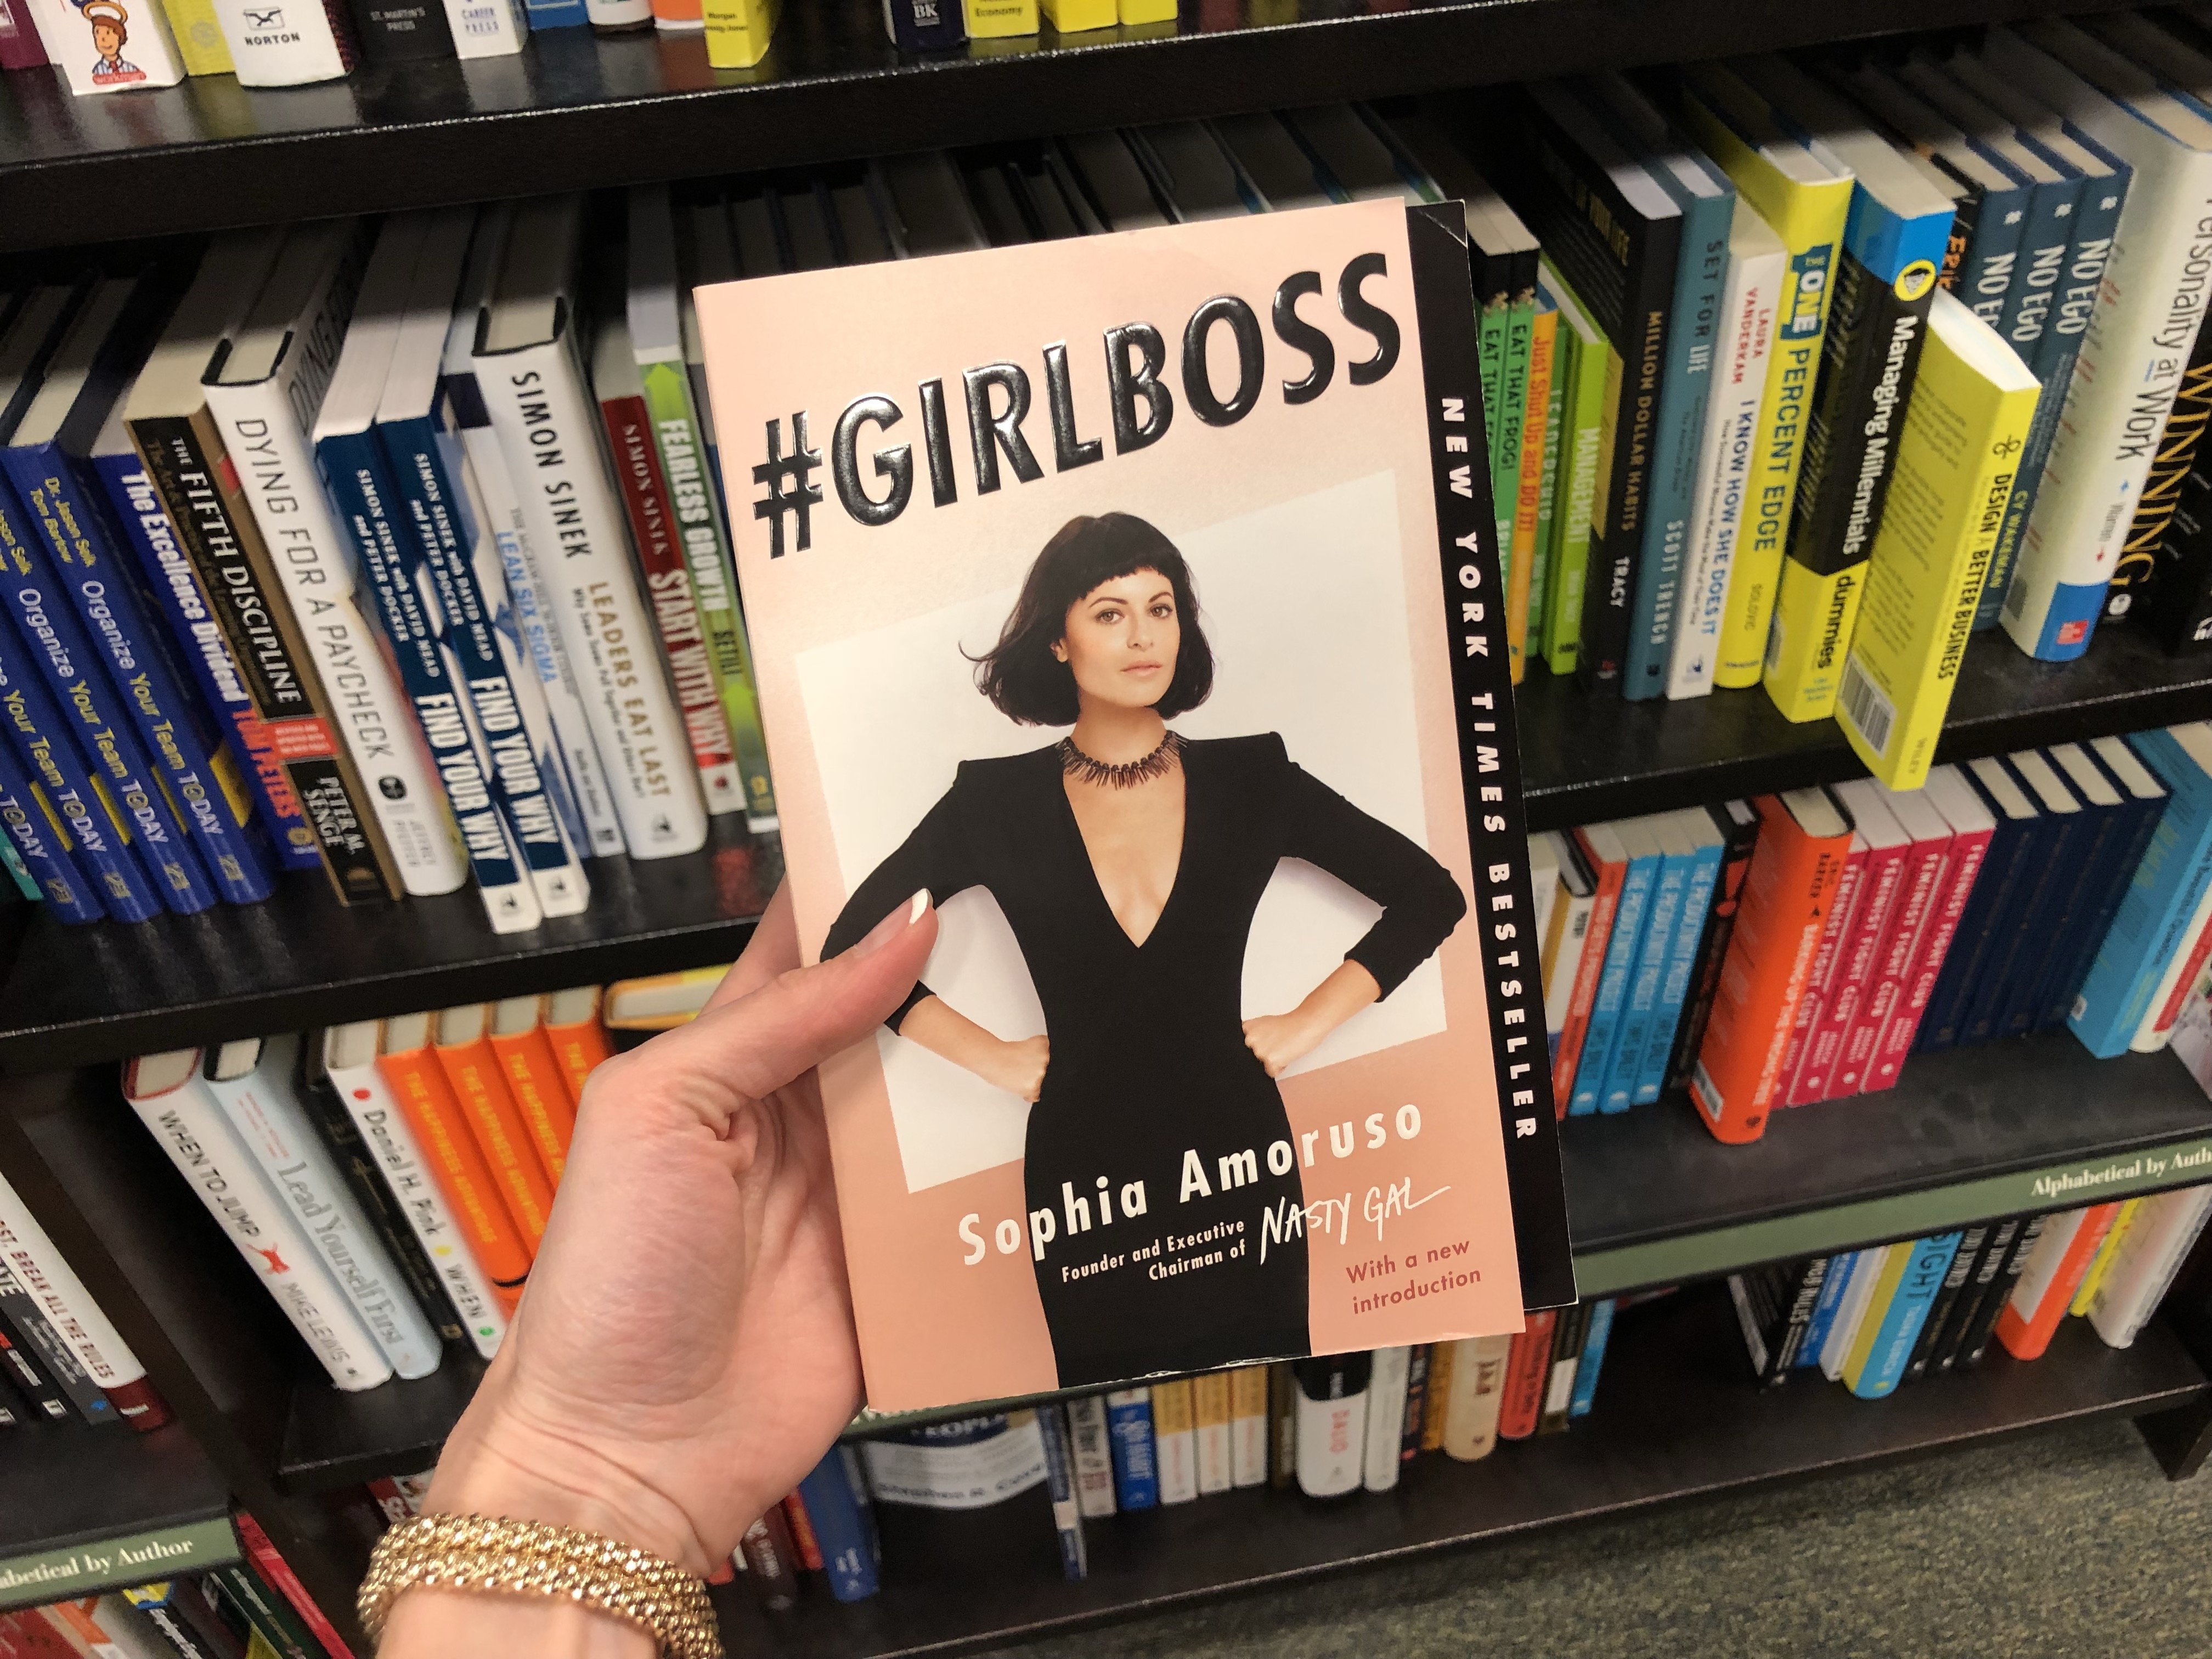 best novels, cookbook, and other books our team loves — GirlBoss by Sophia Amoruso